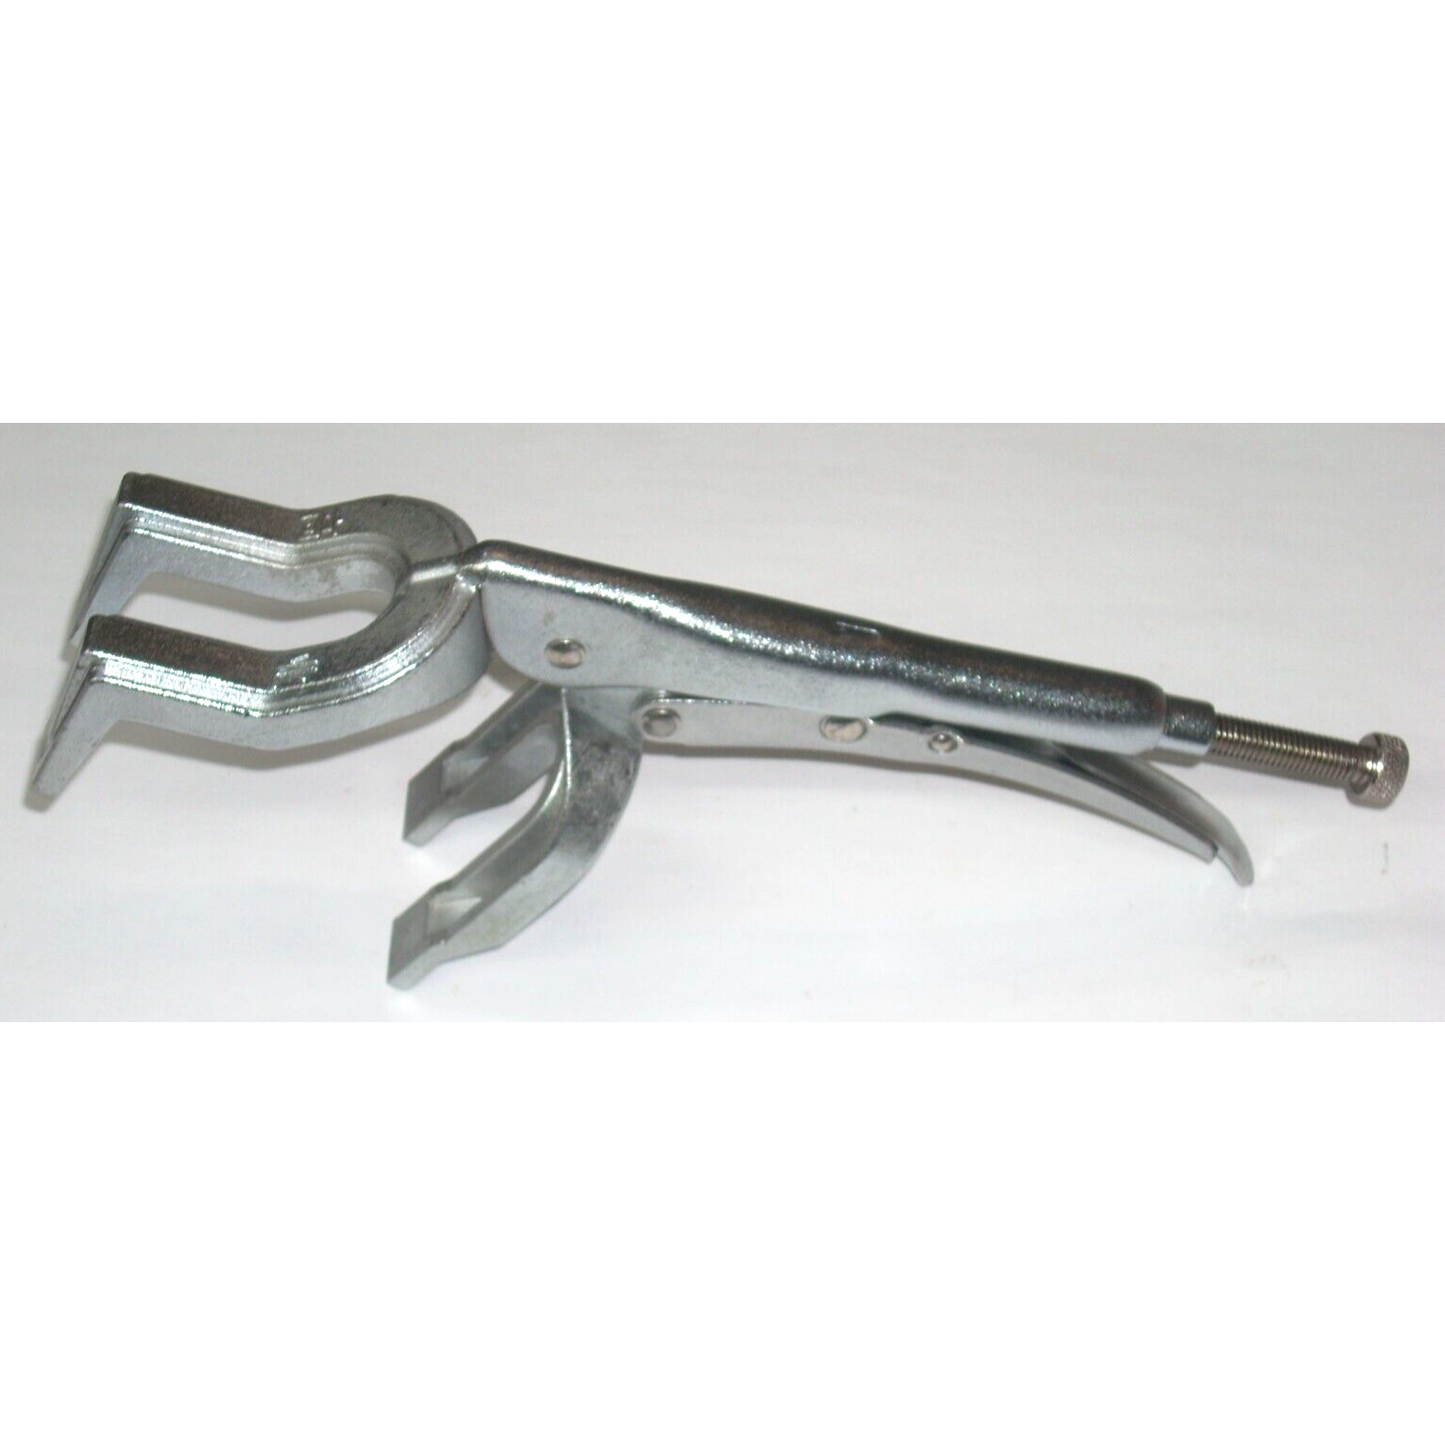 Welding Pipe Holding Clamp Locking Pliers 11 in